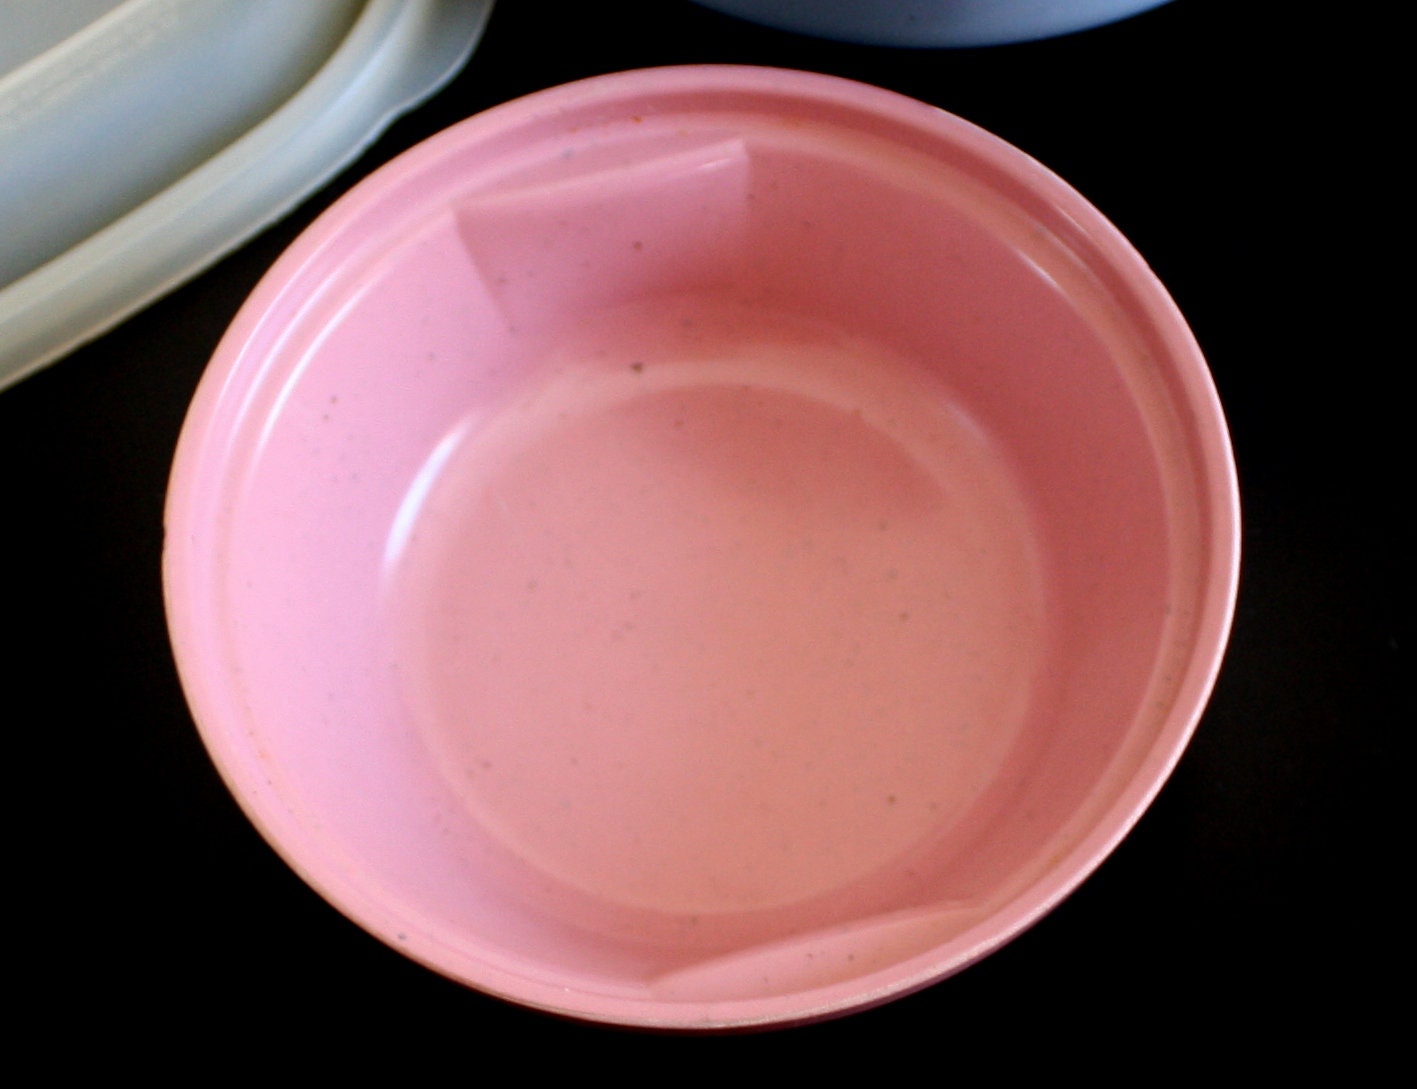 Rubbermaid Microwave Servin Saver Dishes: 4 Oz Bowl, Lid I, or Divided Oval  Dish / Lid V Oven Safe Plastic Containers Mauve Pink Blue Gray 